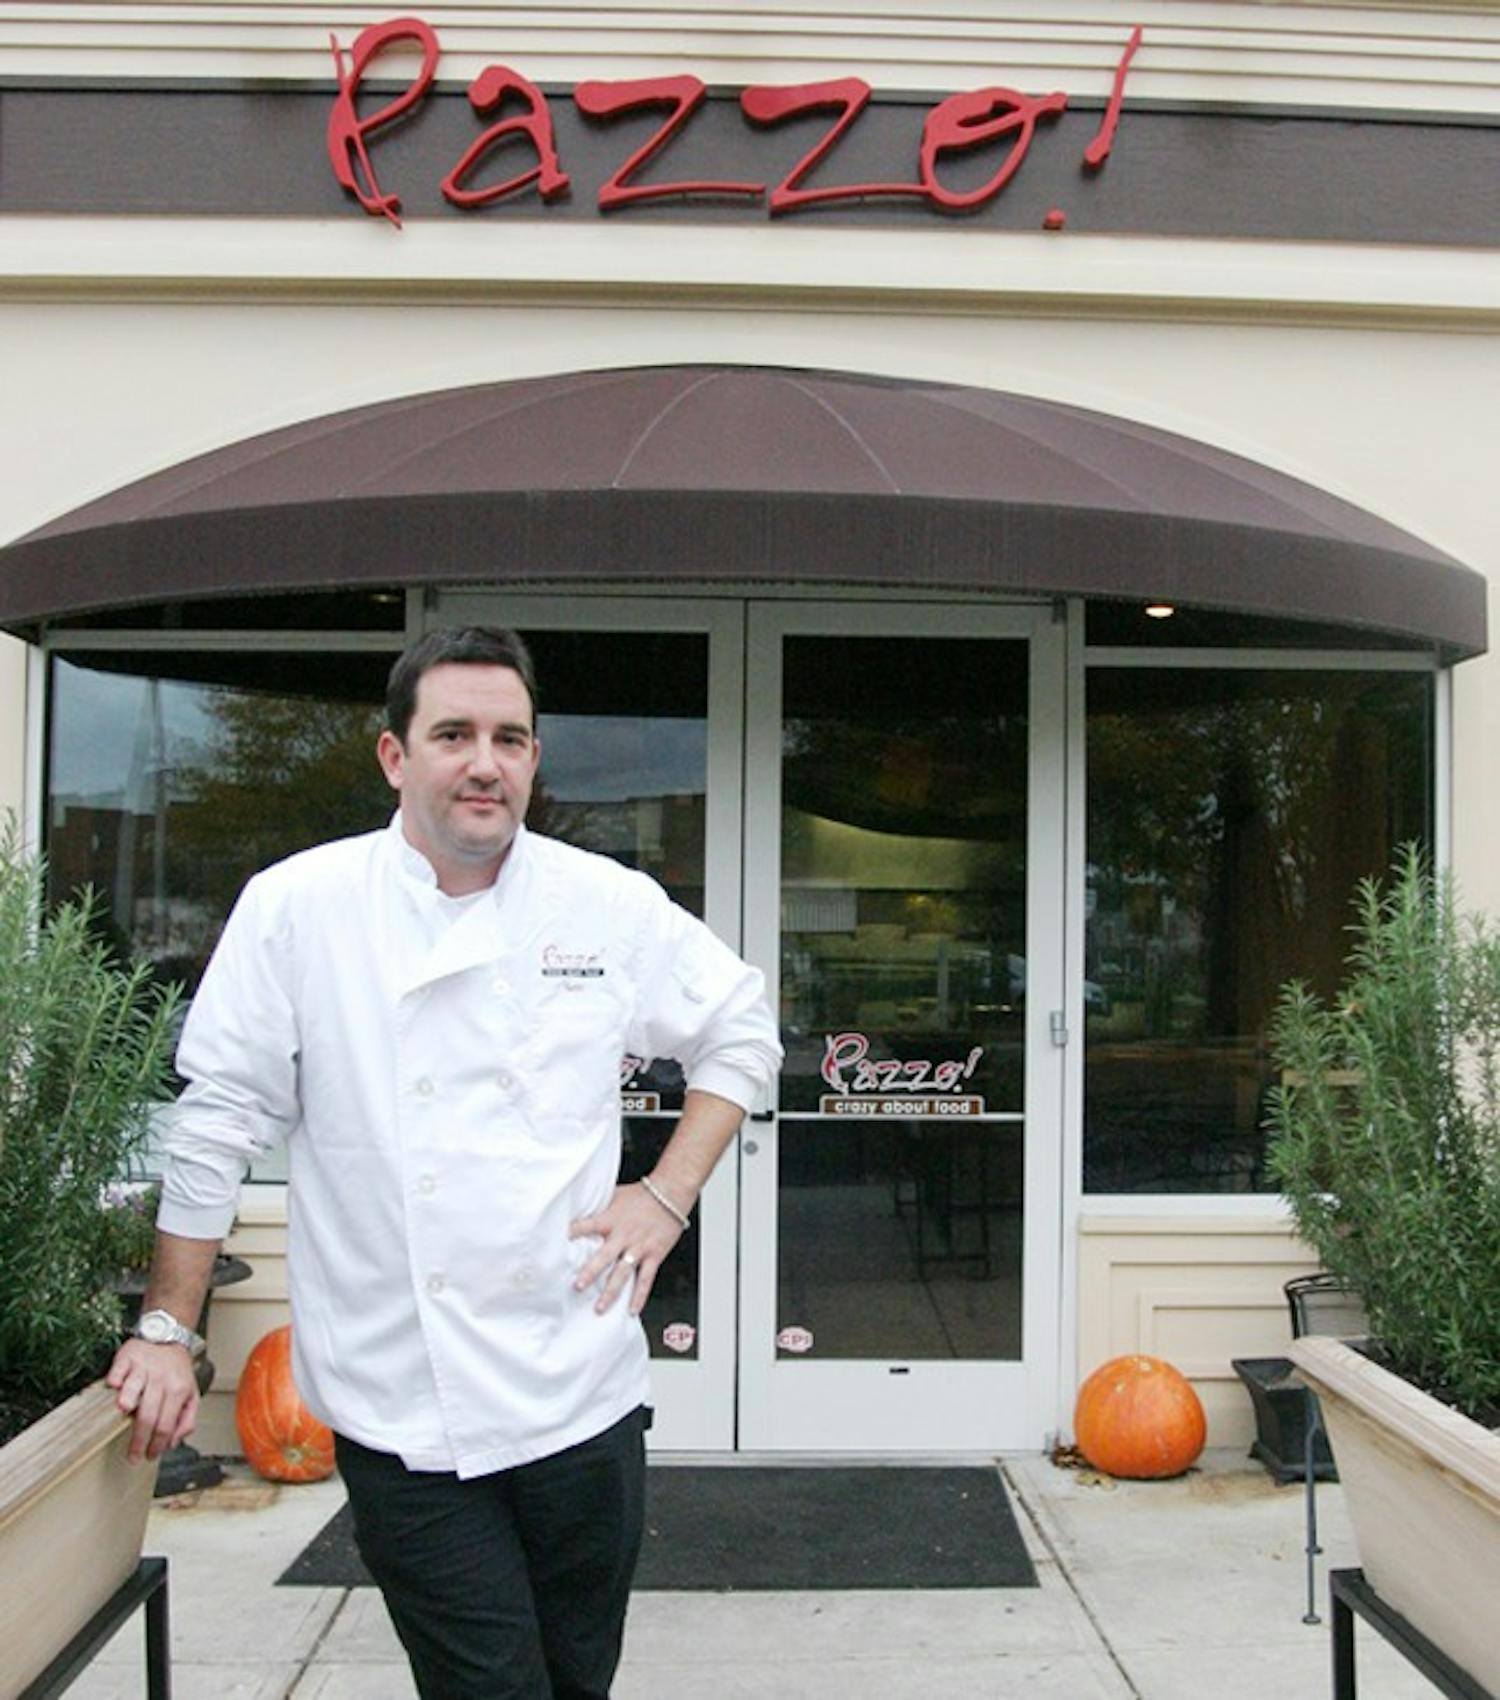 Photo: Chapel Hill’s Pazzo Restaurant levied with child labor fine for 'Little Chef' (Gayatri Surendranathan)